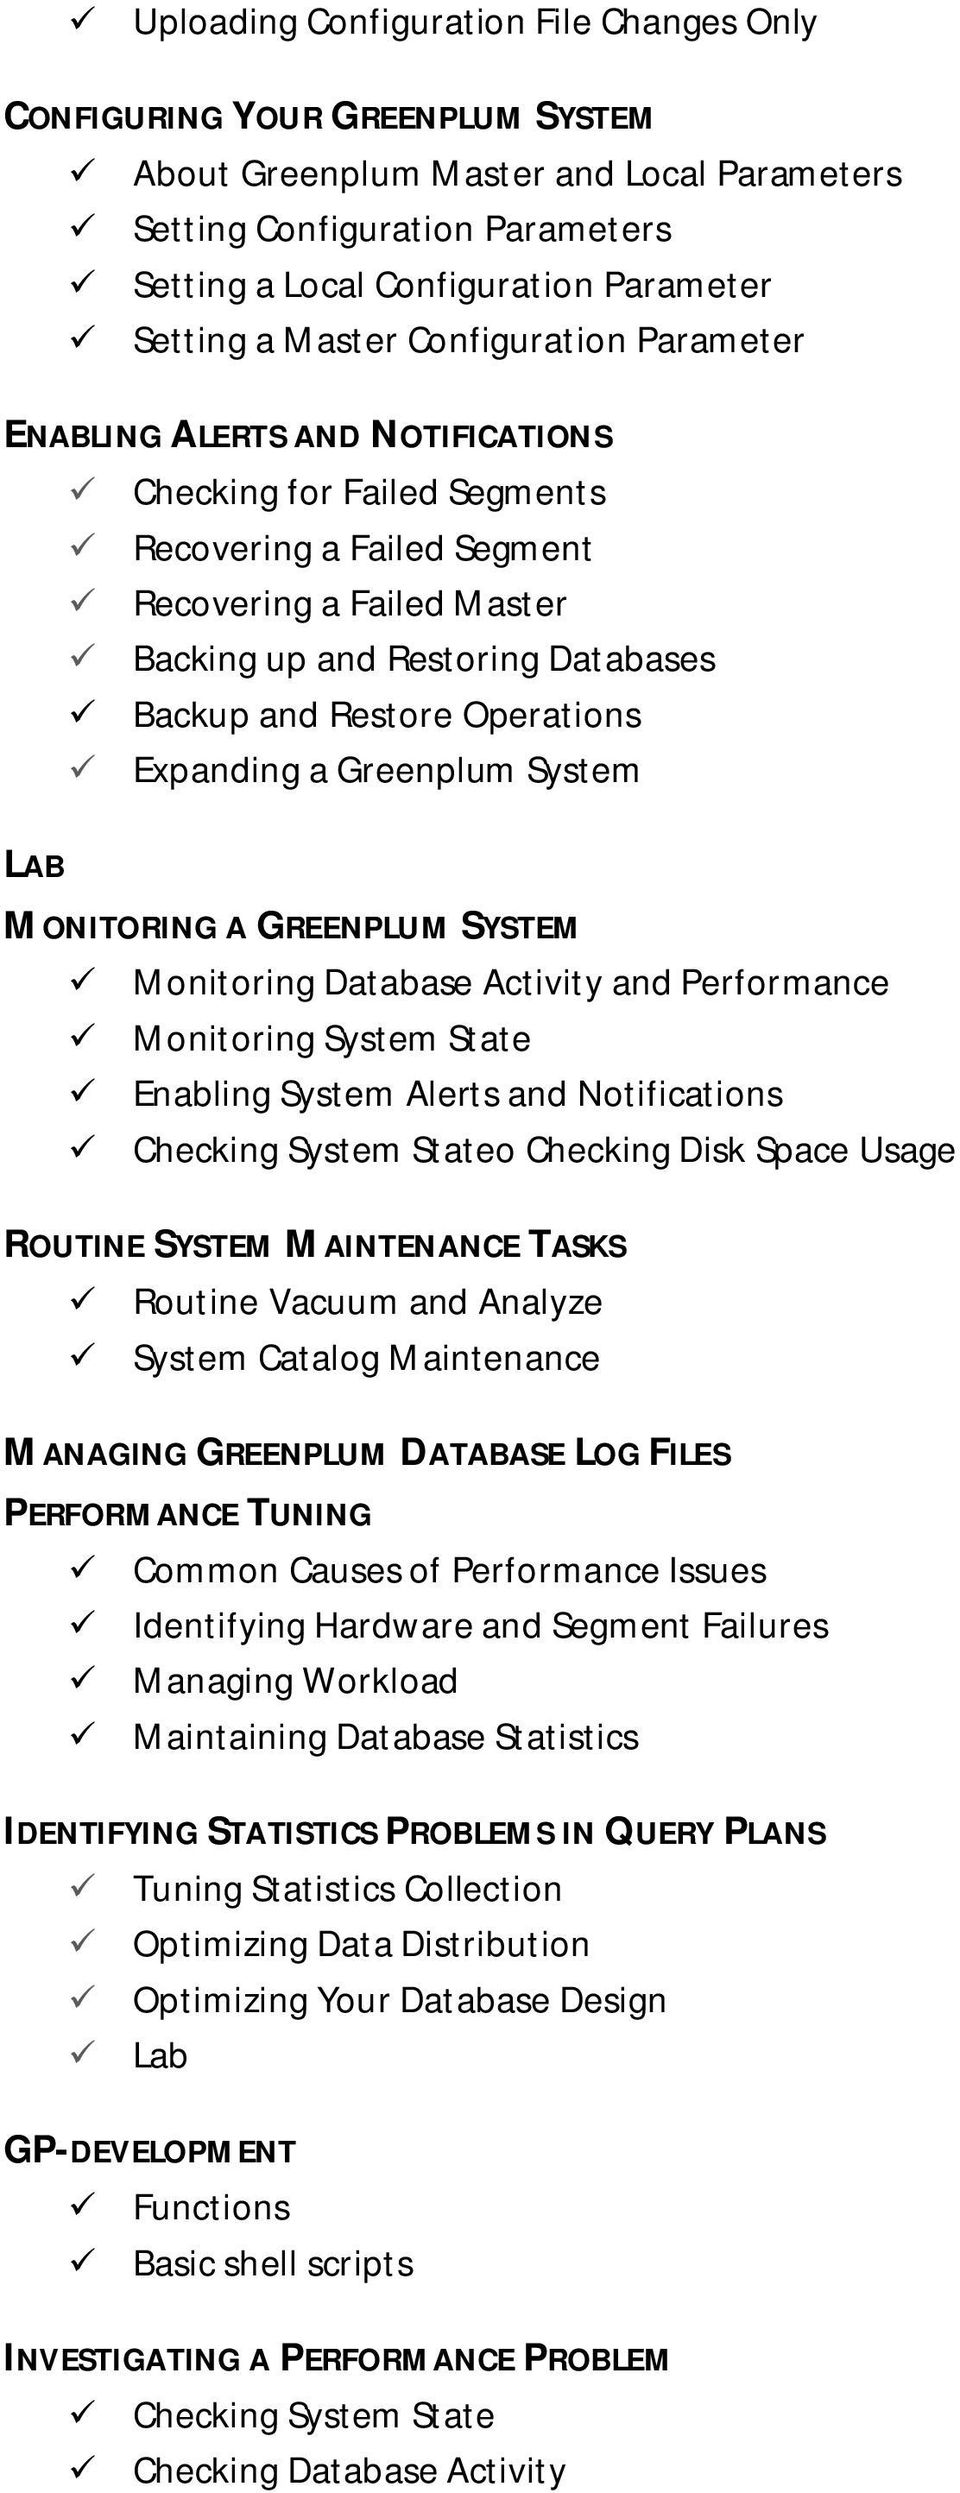 Backup and Restore Operations Expanding a Greenplum System MONITORING A GREENPLUM SYSTEM Monitoring Database Activity and Performance Monitoring System State Enabling System Alerts and Notifications